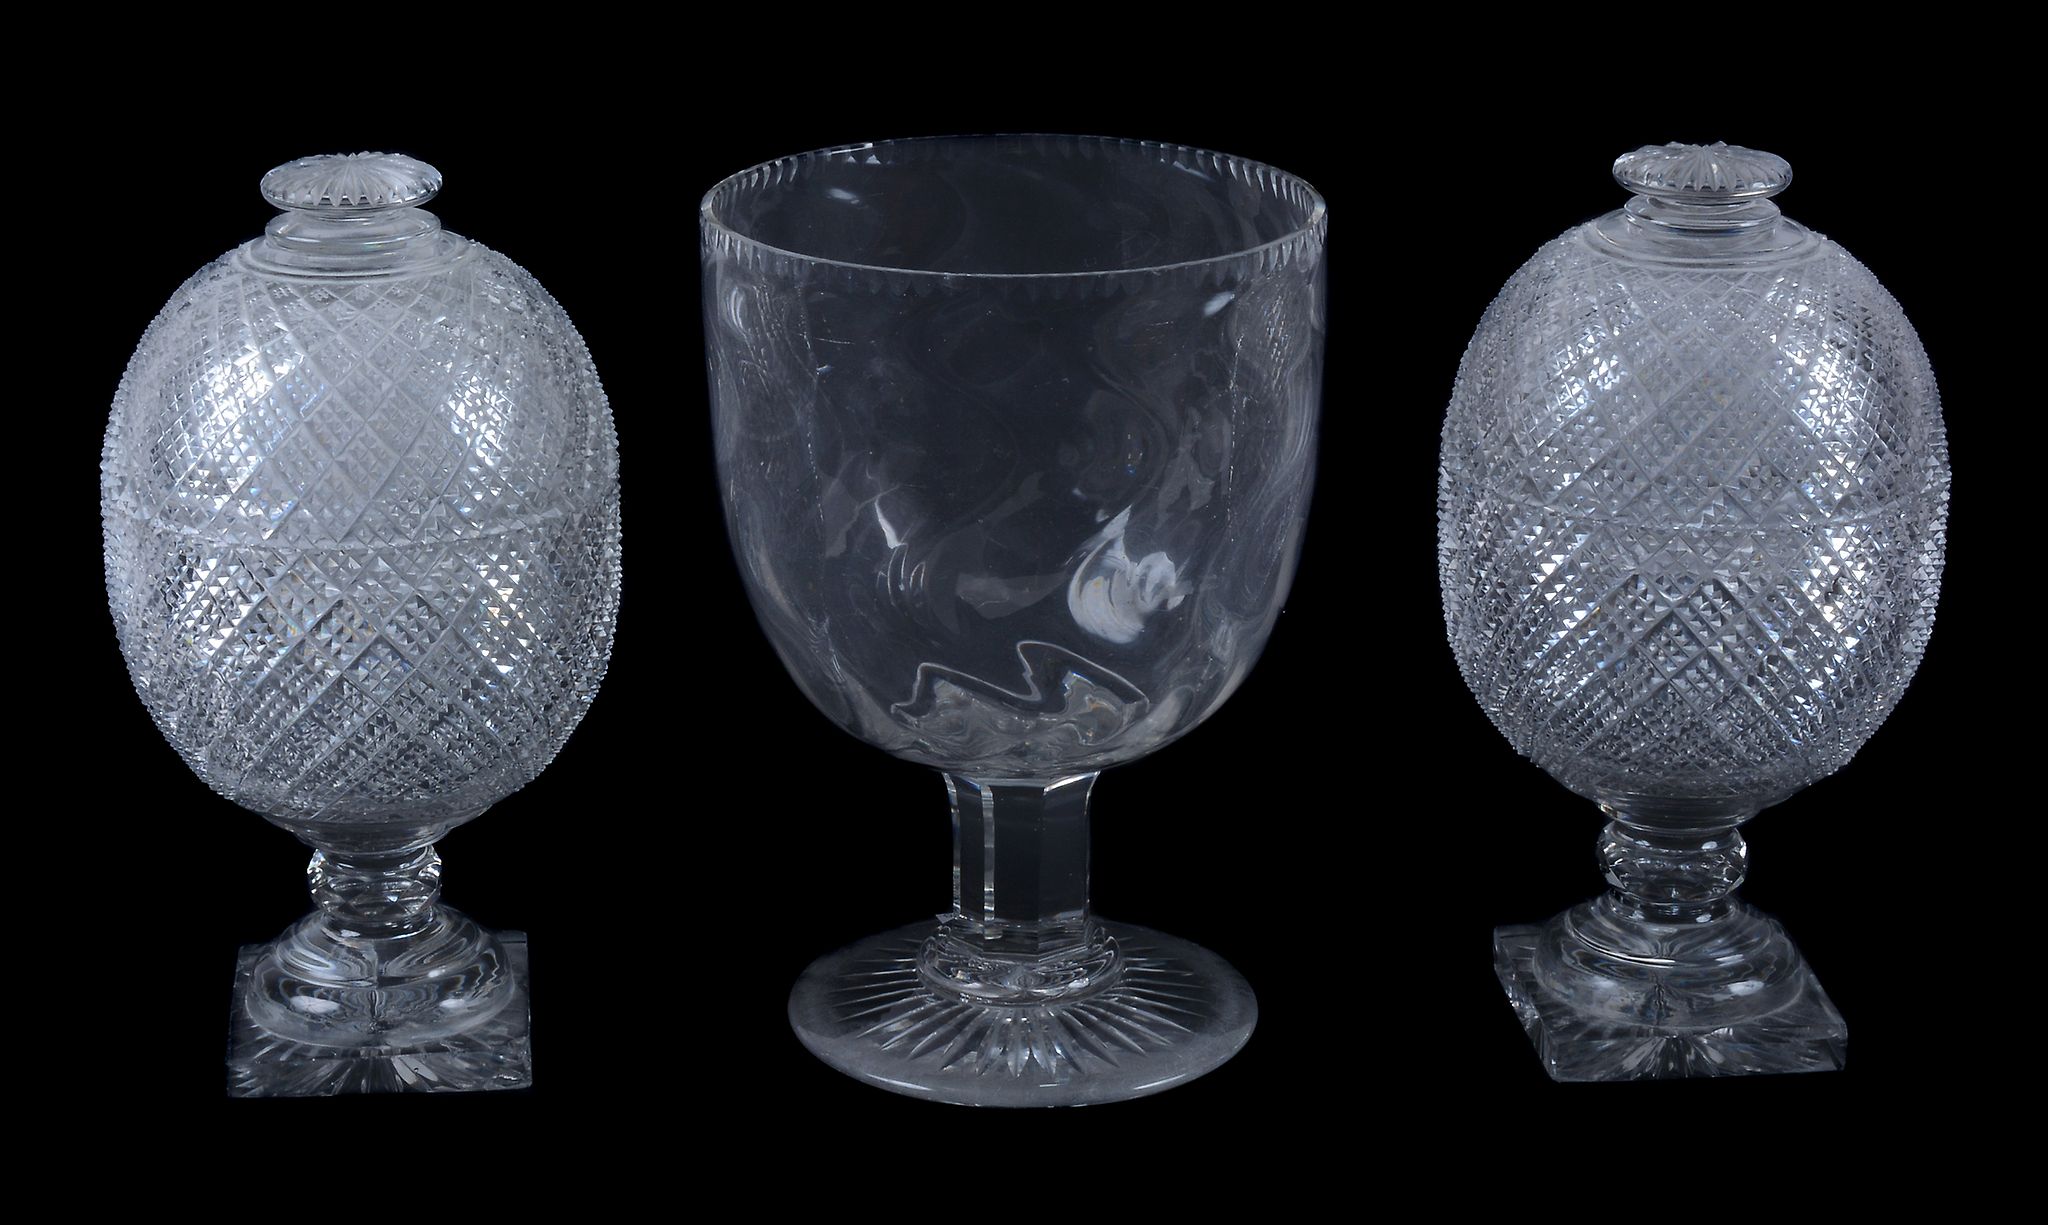 A pair of English cut-glass bonbonieres and covers in the Regency style